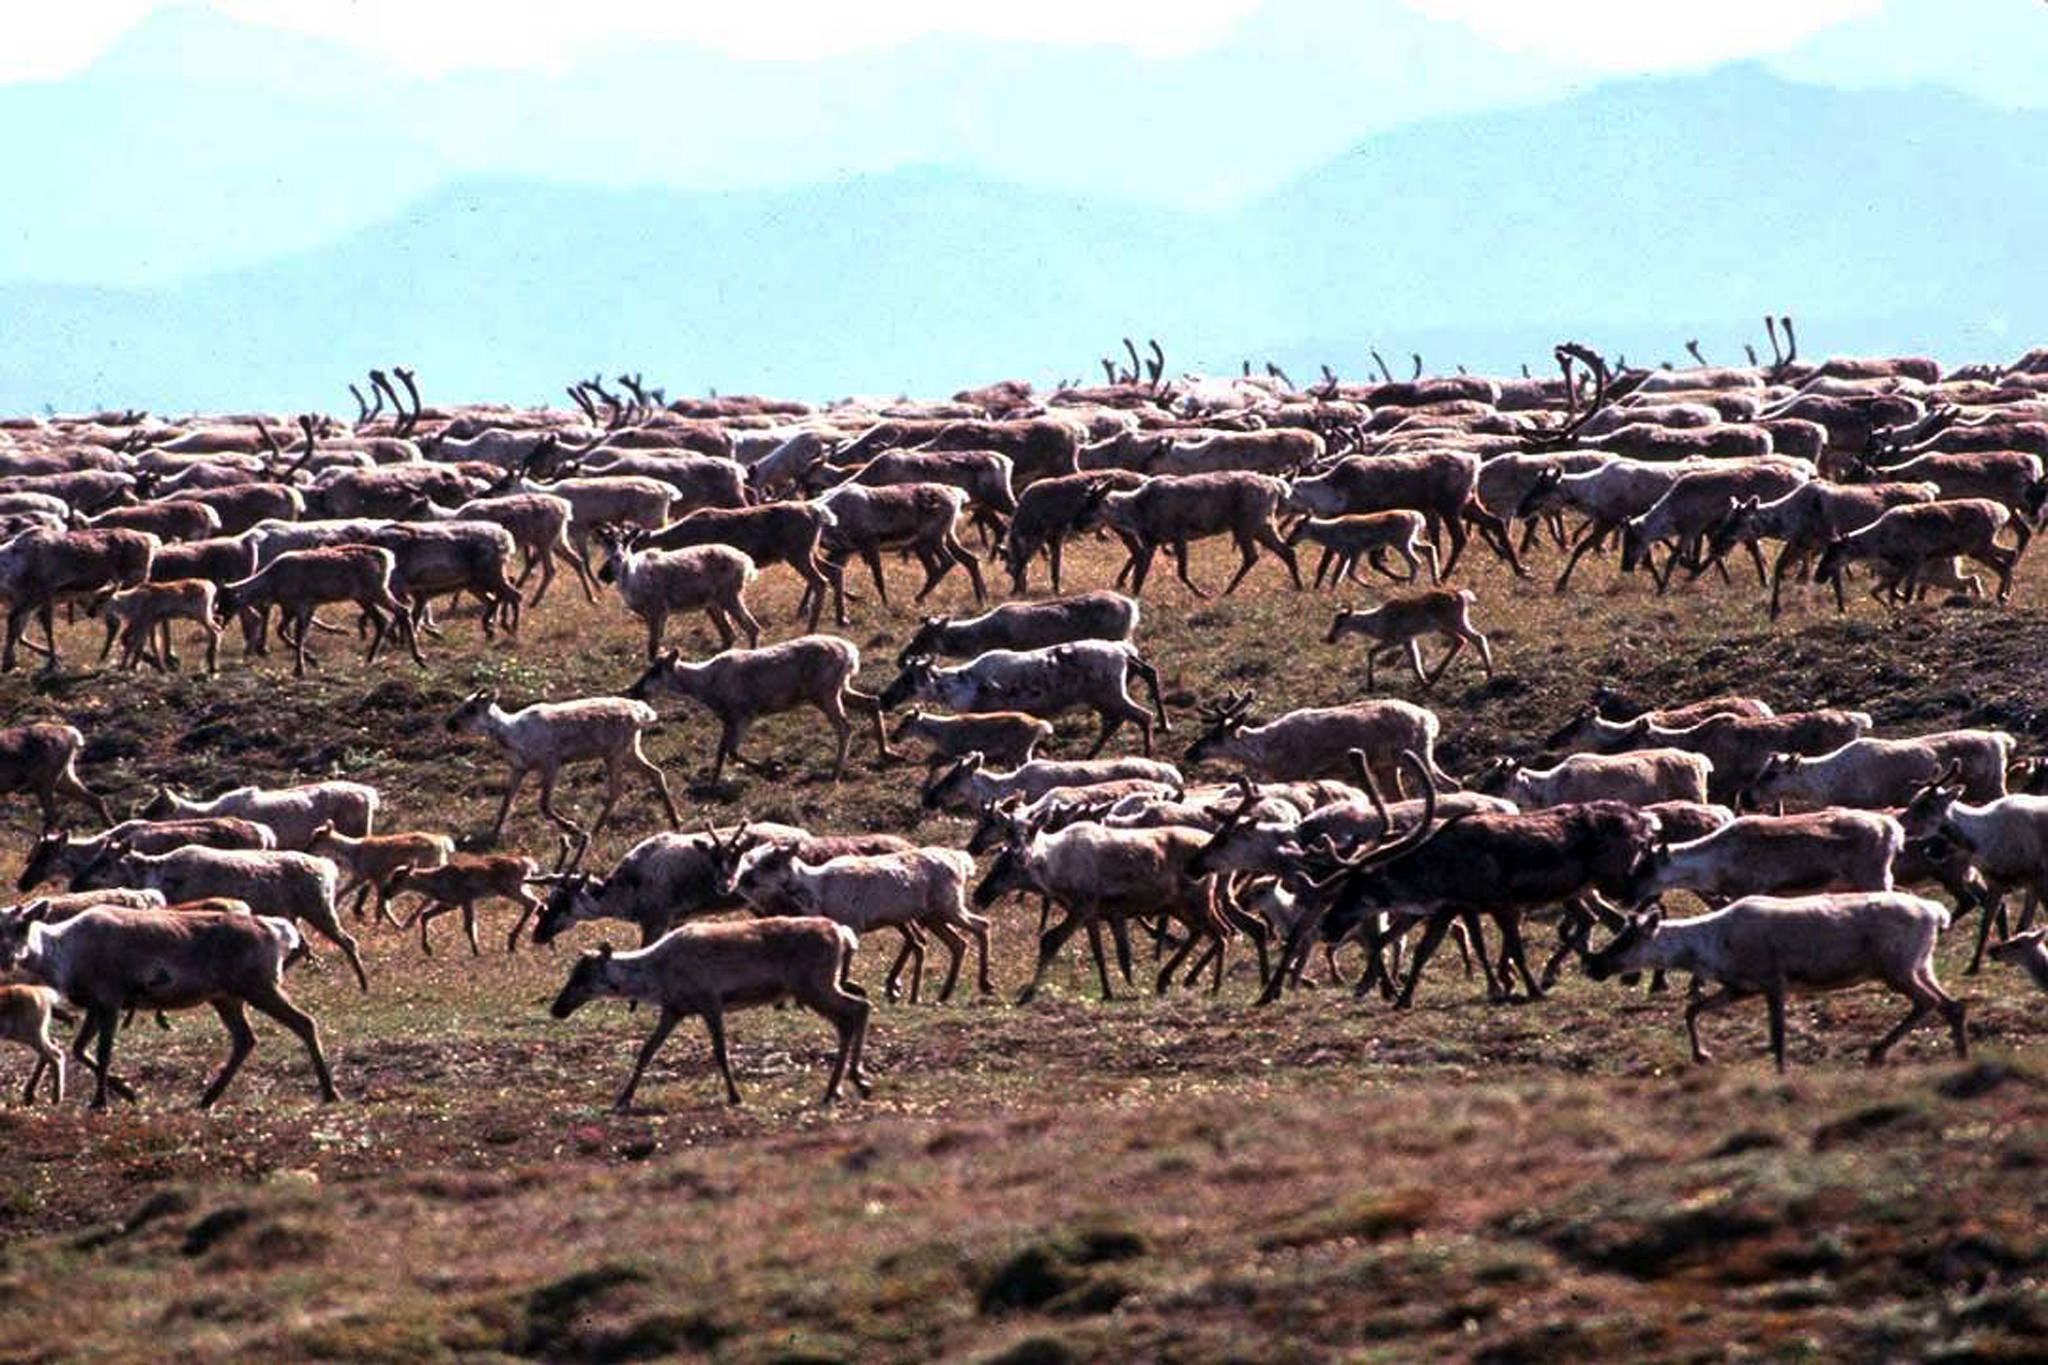 In this undated photo provided by the U.S. Fish and Wildlife Service, caribou from the Porcupine Caribou Herd migrate onto the coastal plain of the Arctic National Wildlife Refuge in northeast Alaska. A showdown is looming in the nation’s capital over whether to open America’s largest wildlife refuge to oil drilling. A budget measure approved by the Republican-controlled Congress allows lawmakers to pursue legislation that would allow drilling on the coastal plain of the Arctic National Wildlife Refuge. The refuge takes up an area nearly the size of South Carolina in Alaska’s northeast corner. (U.S. Fish and Wildlife Service via AP)